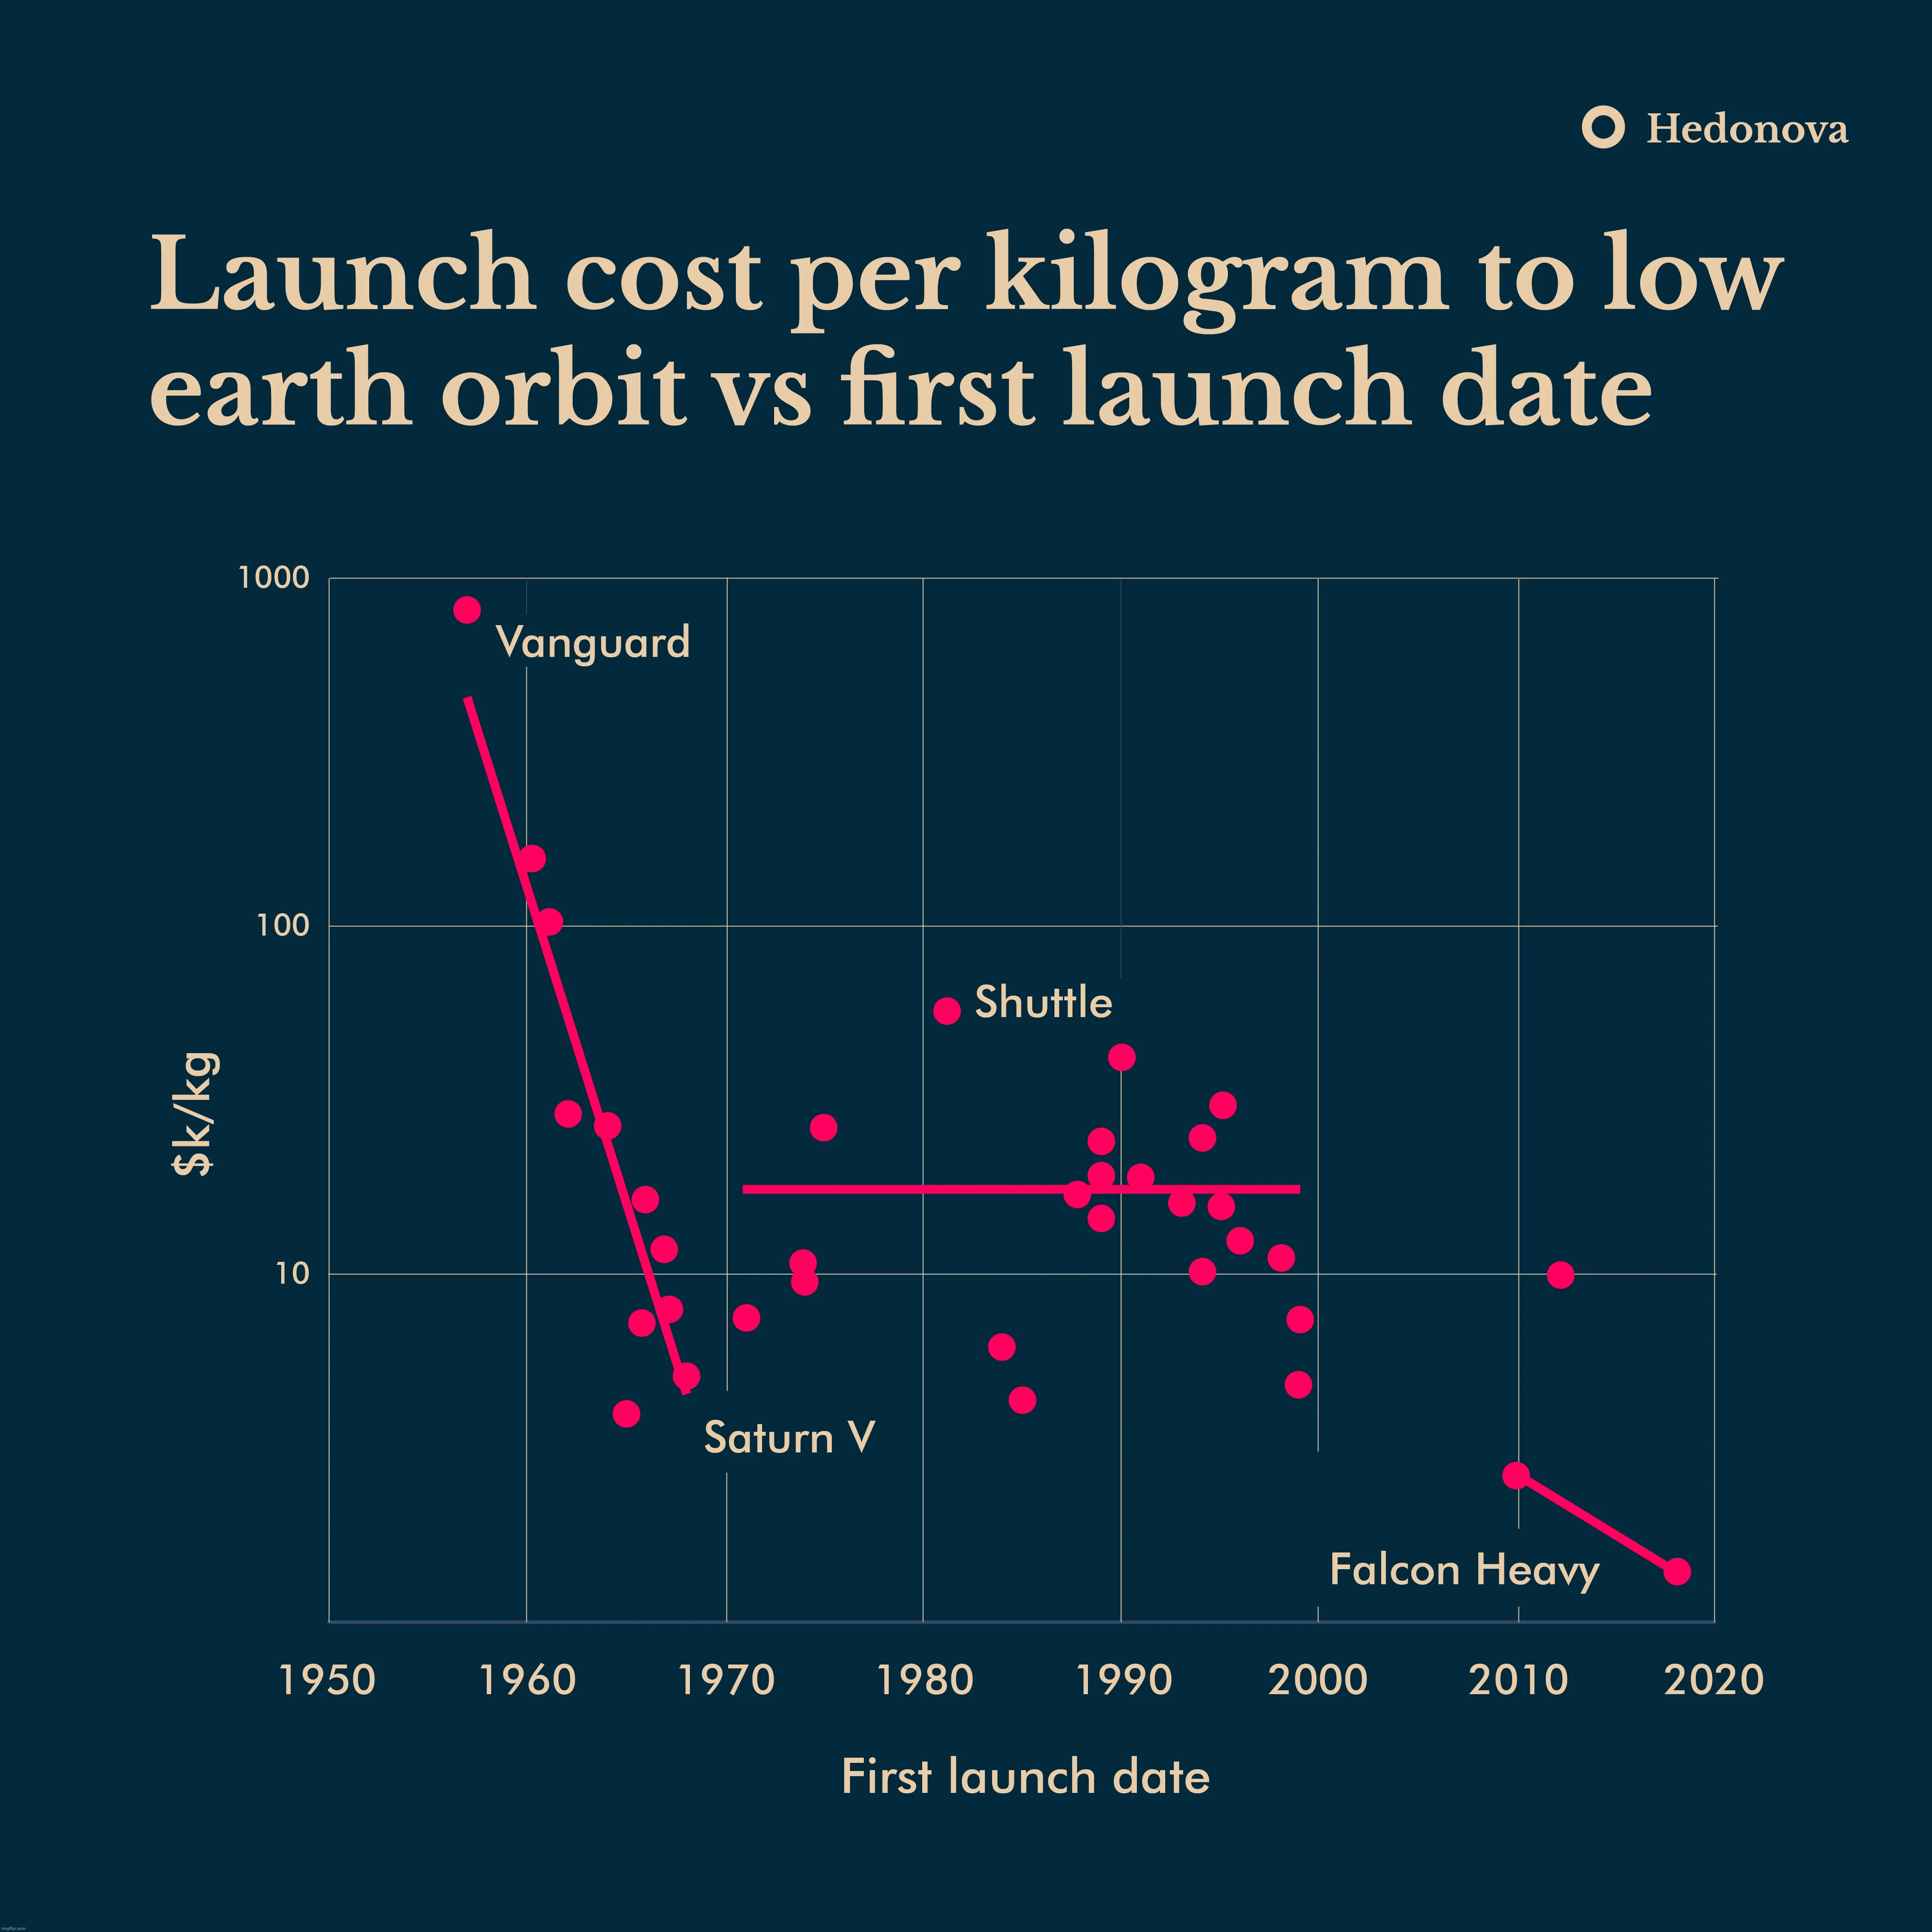 the cost it takes to send a kilogram to orbit is rapidly decreasing | made w/ Imgflip meme maker